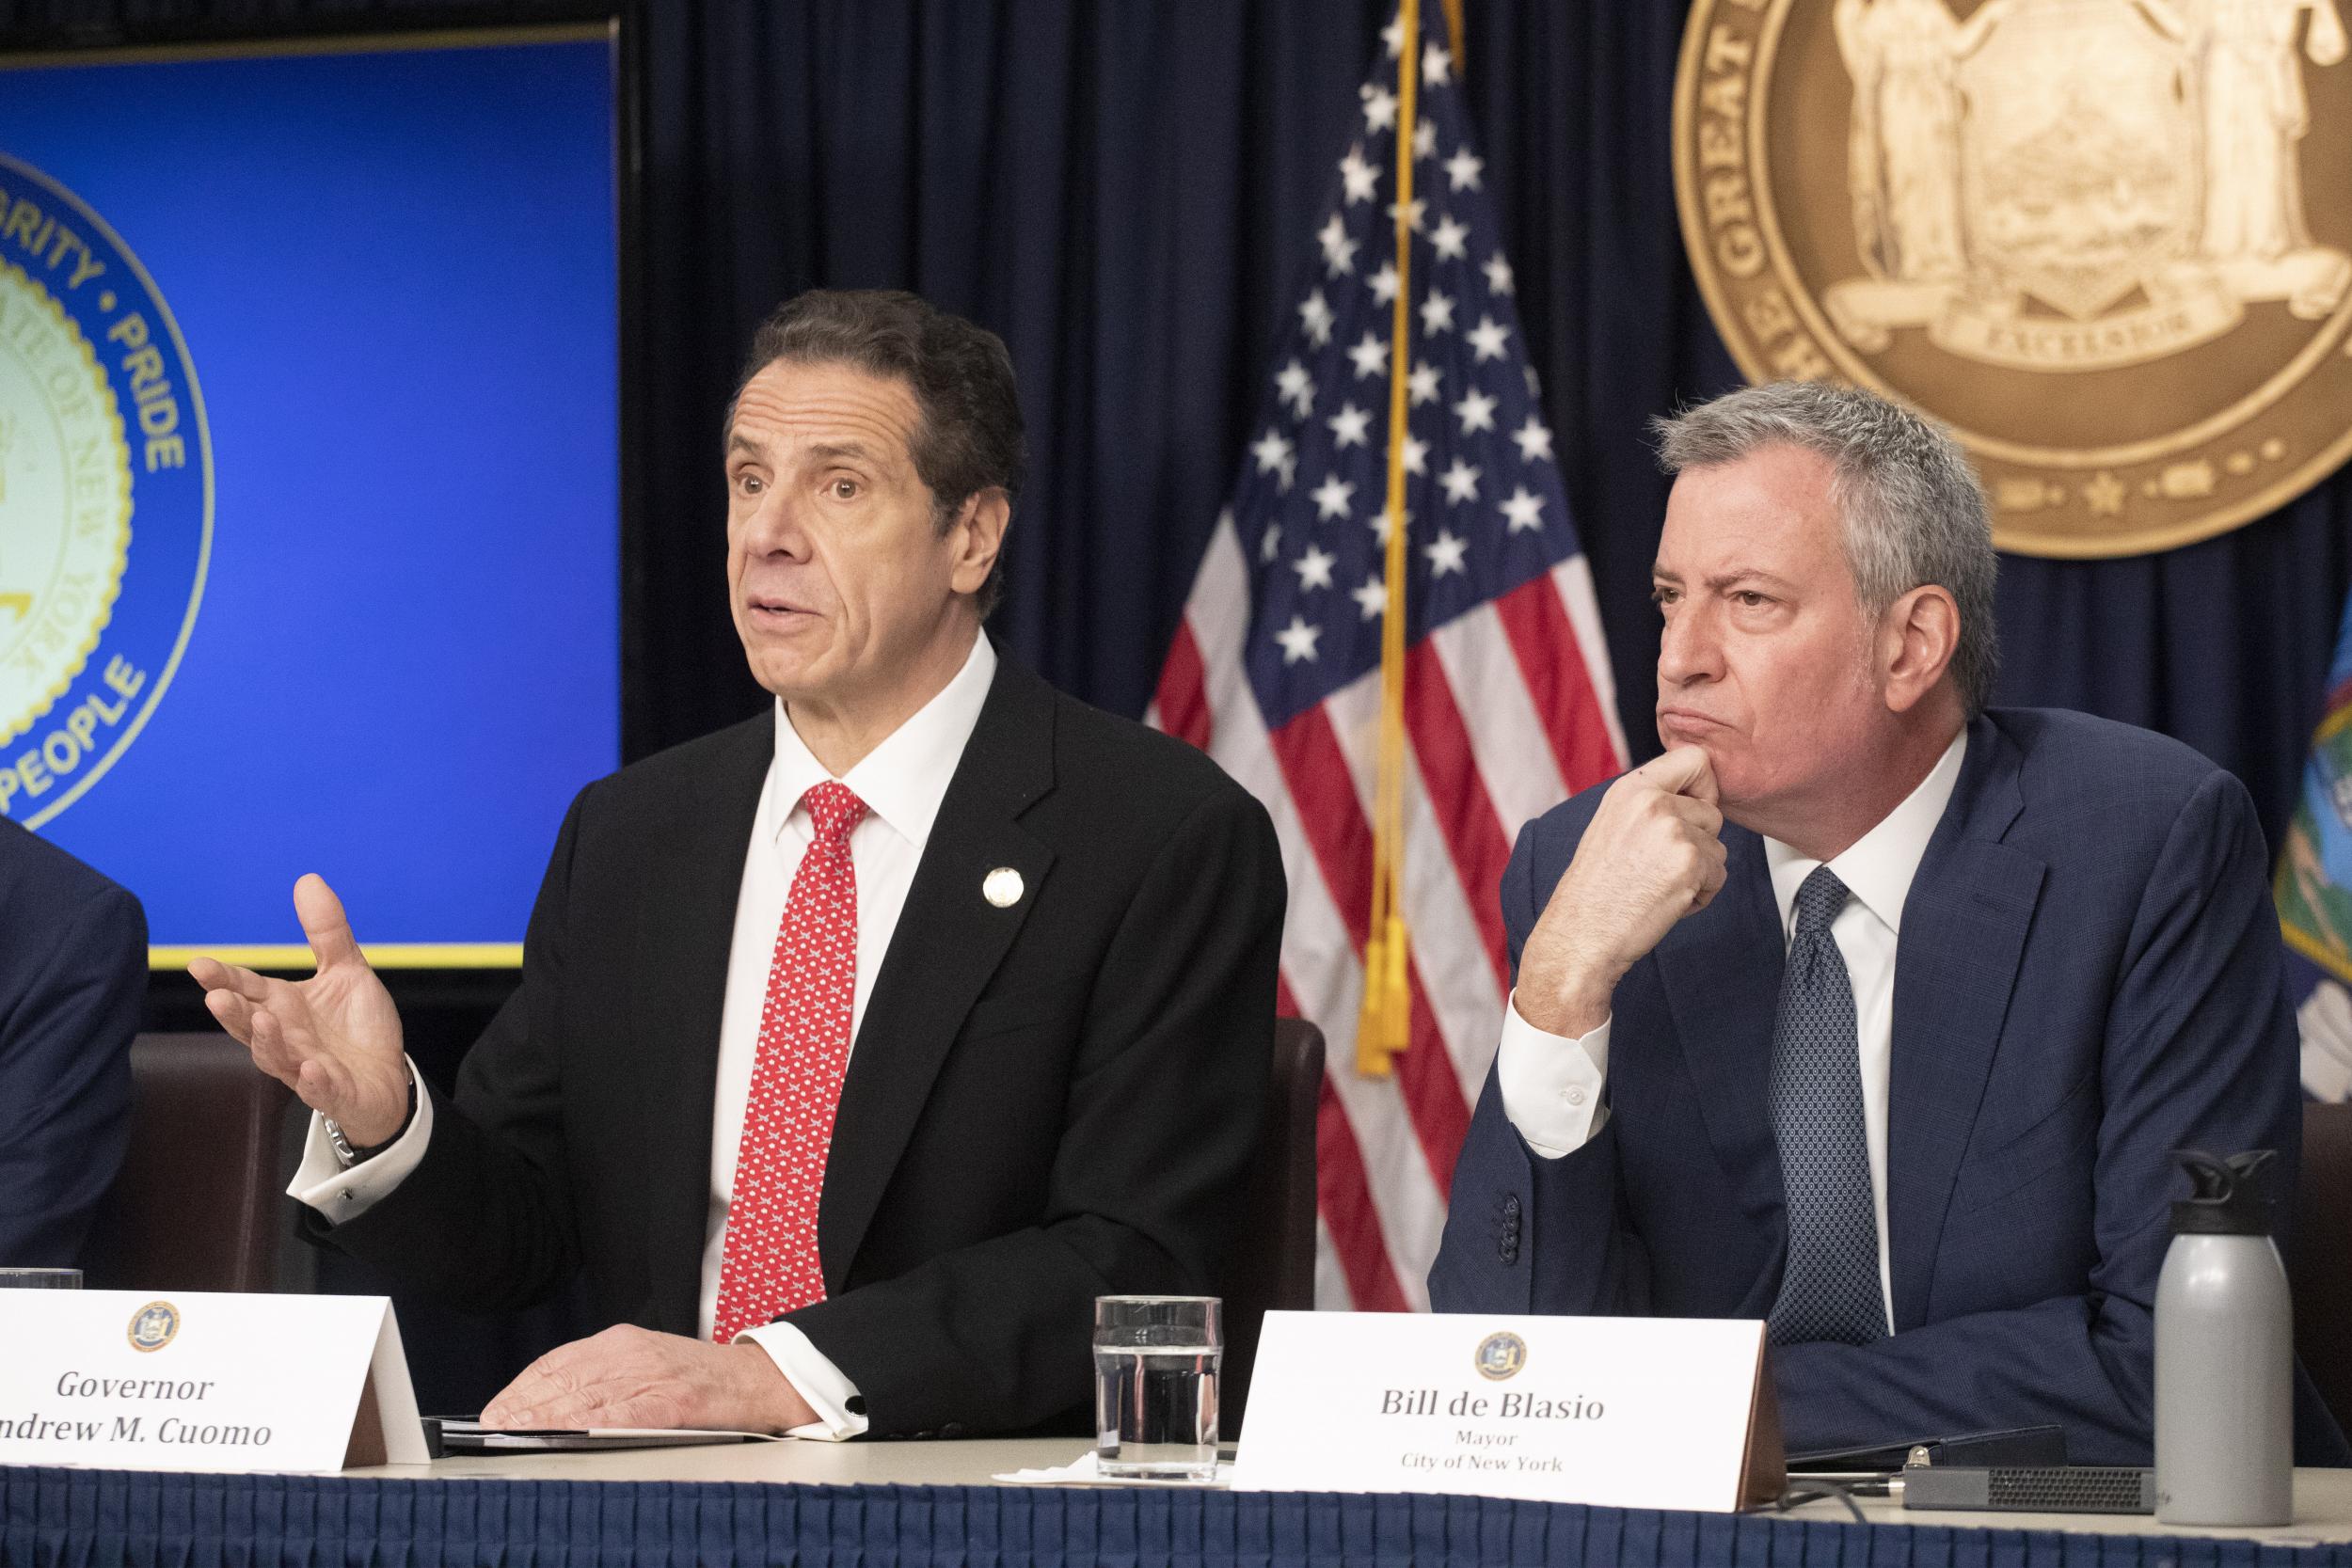 Coronavirus: New York mayor orders schools to stay shut but governor insists decision is his